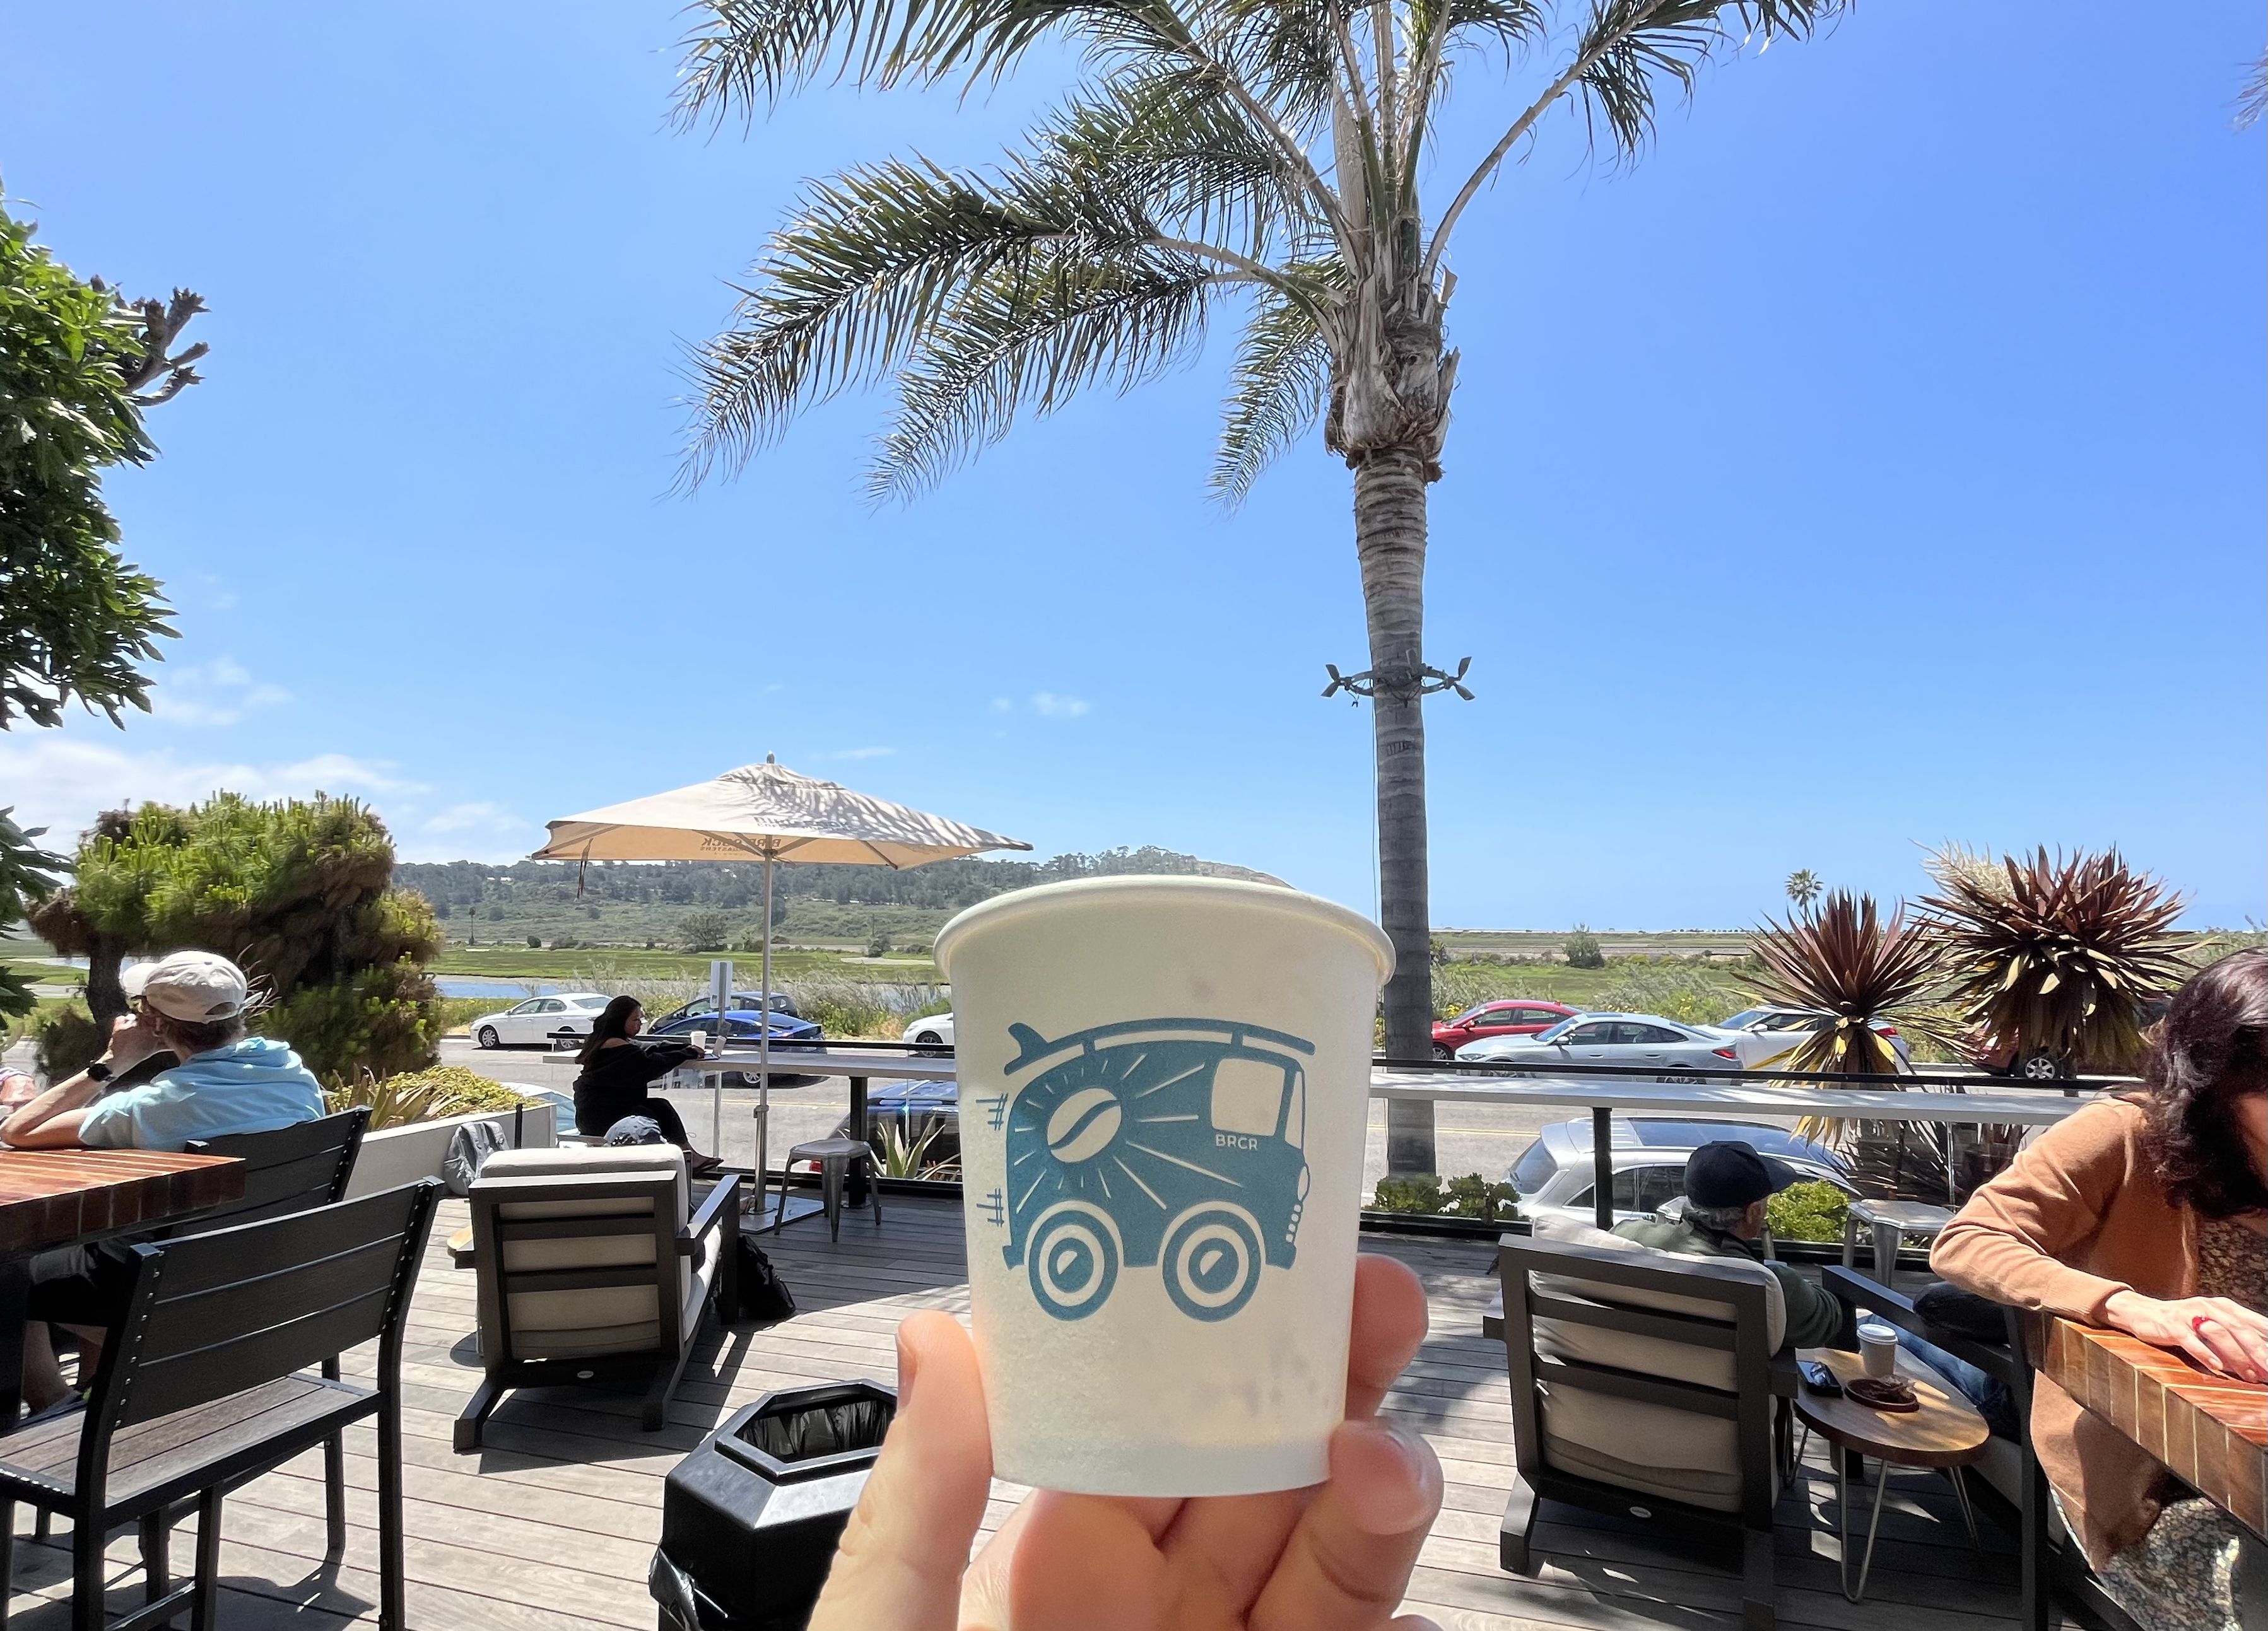 A hand holds up a white coffee cup on an outside patio with palm trees and a lagoon in the background.